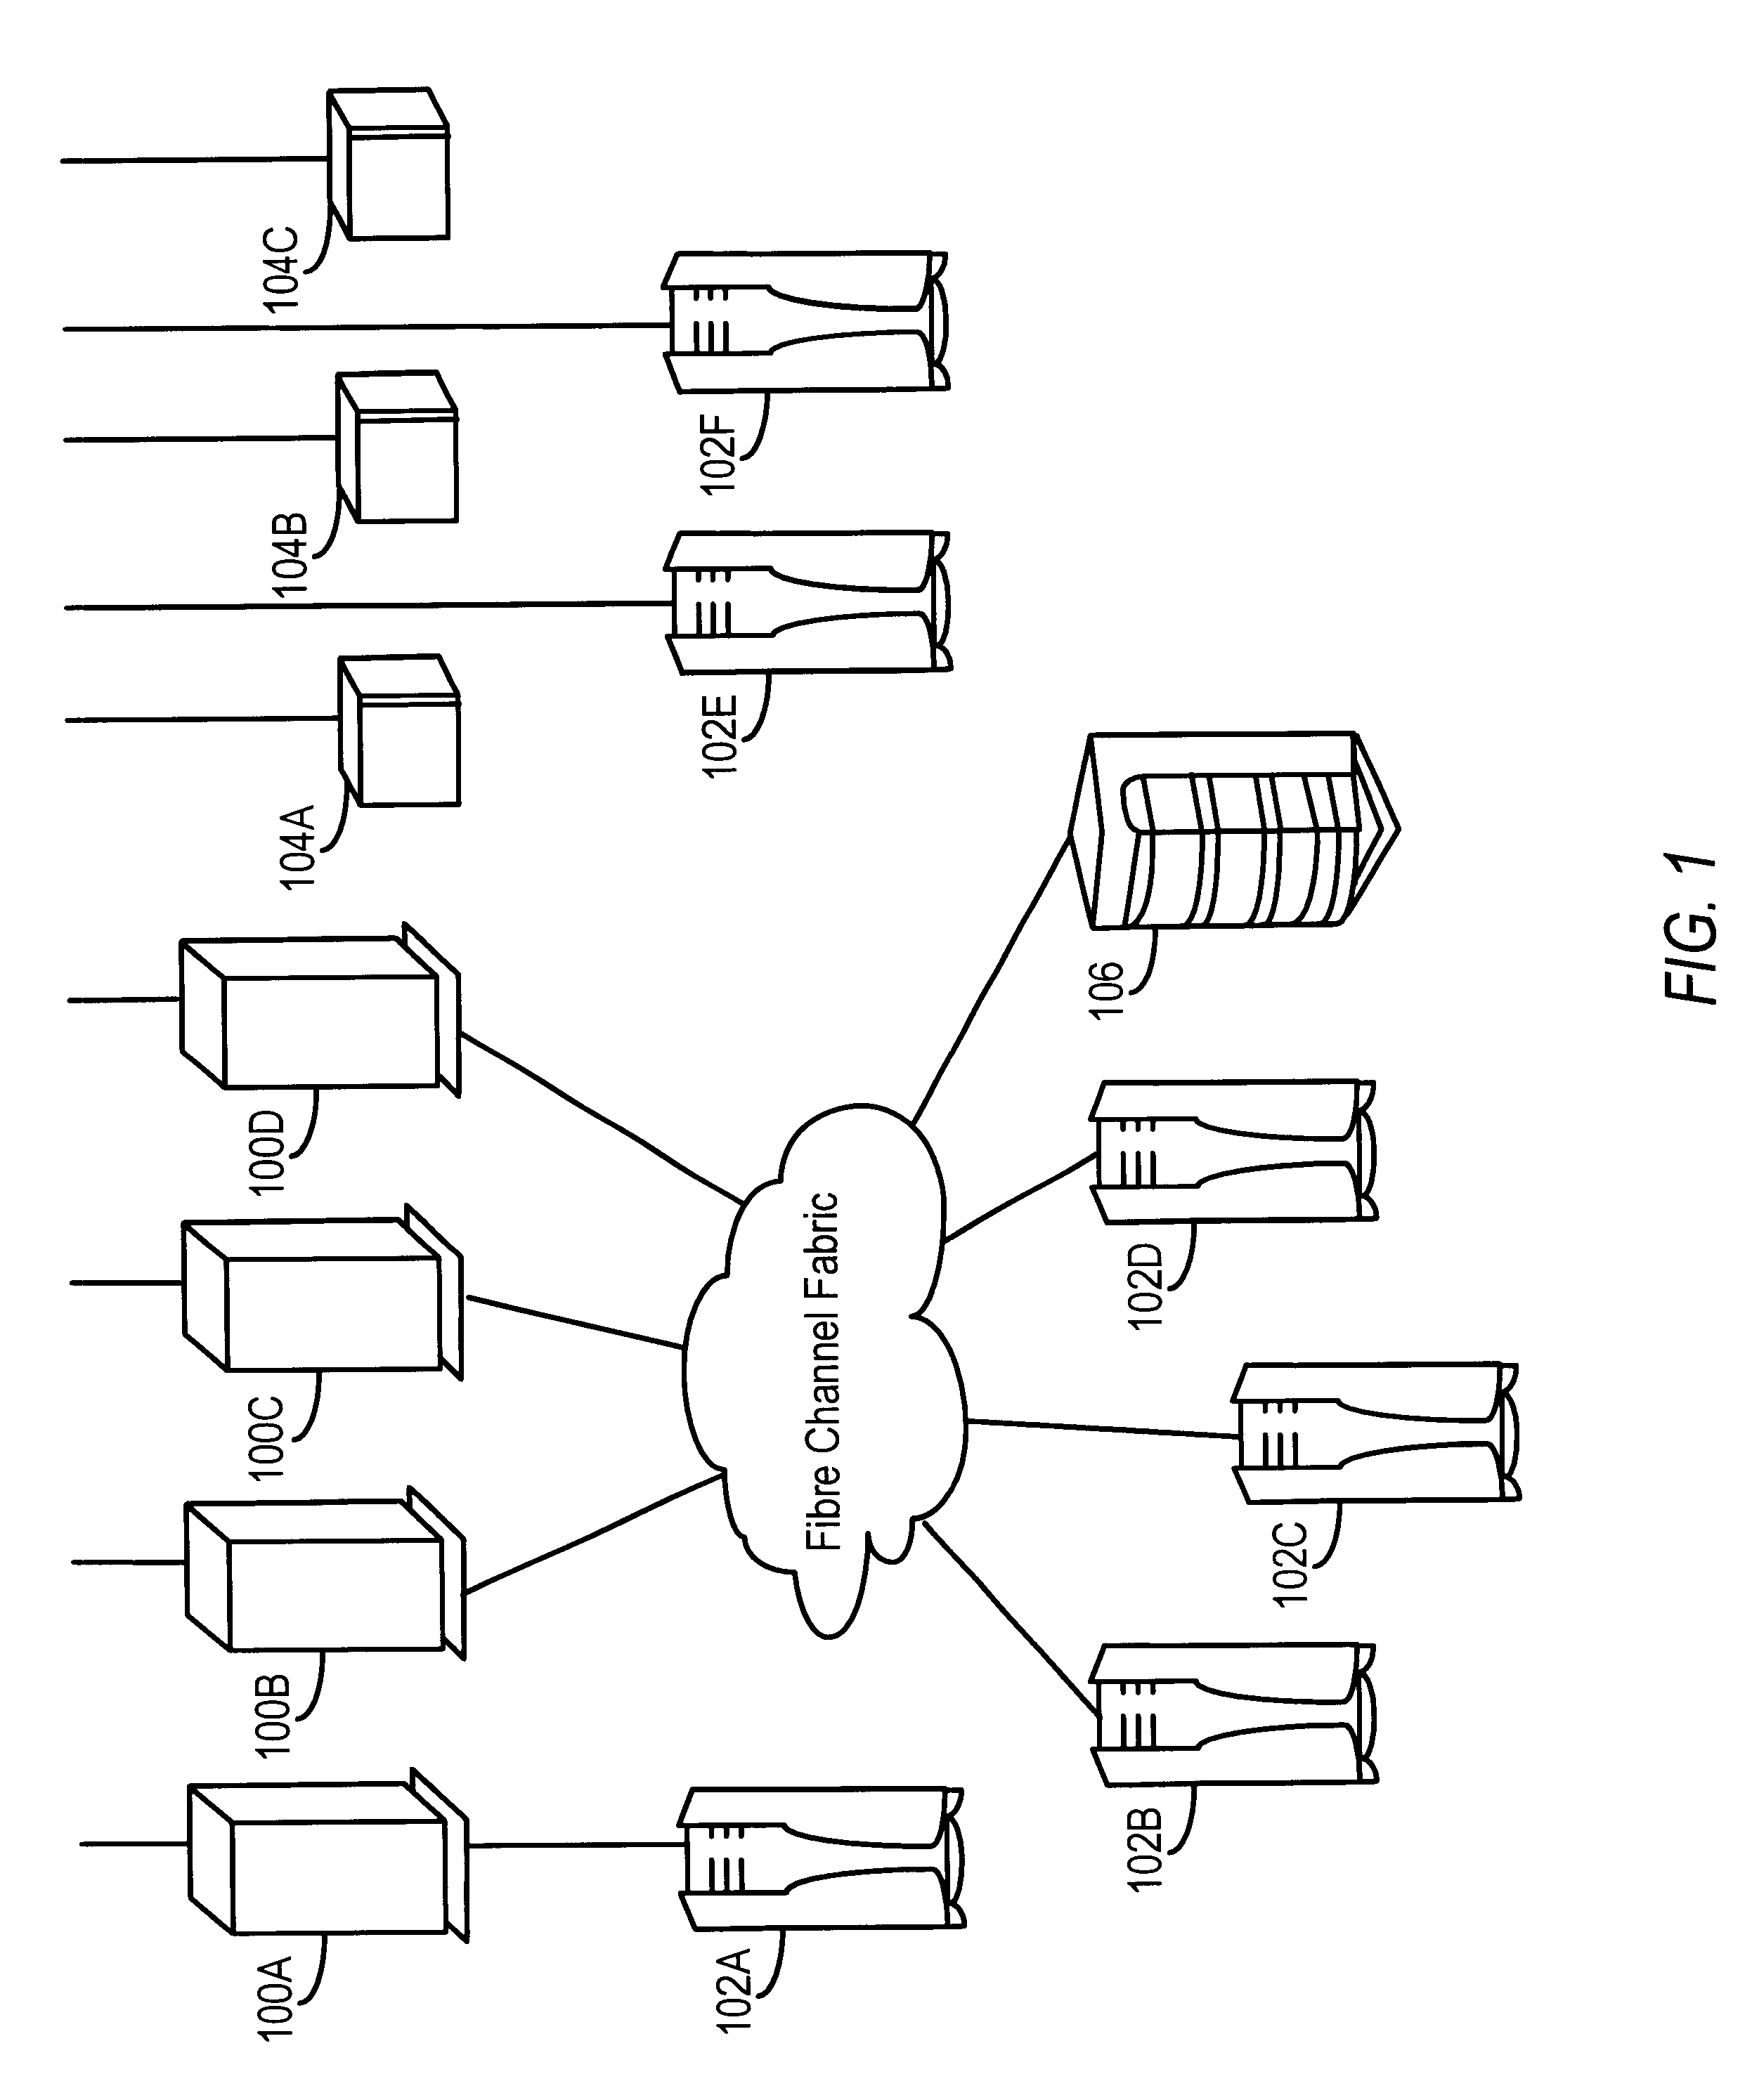 Graphical user interface for configuration of a storage system